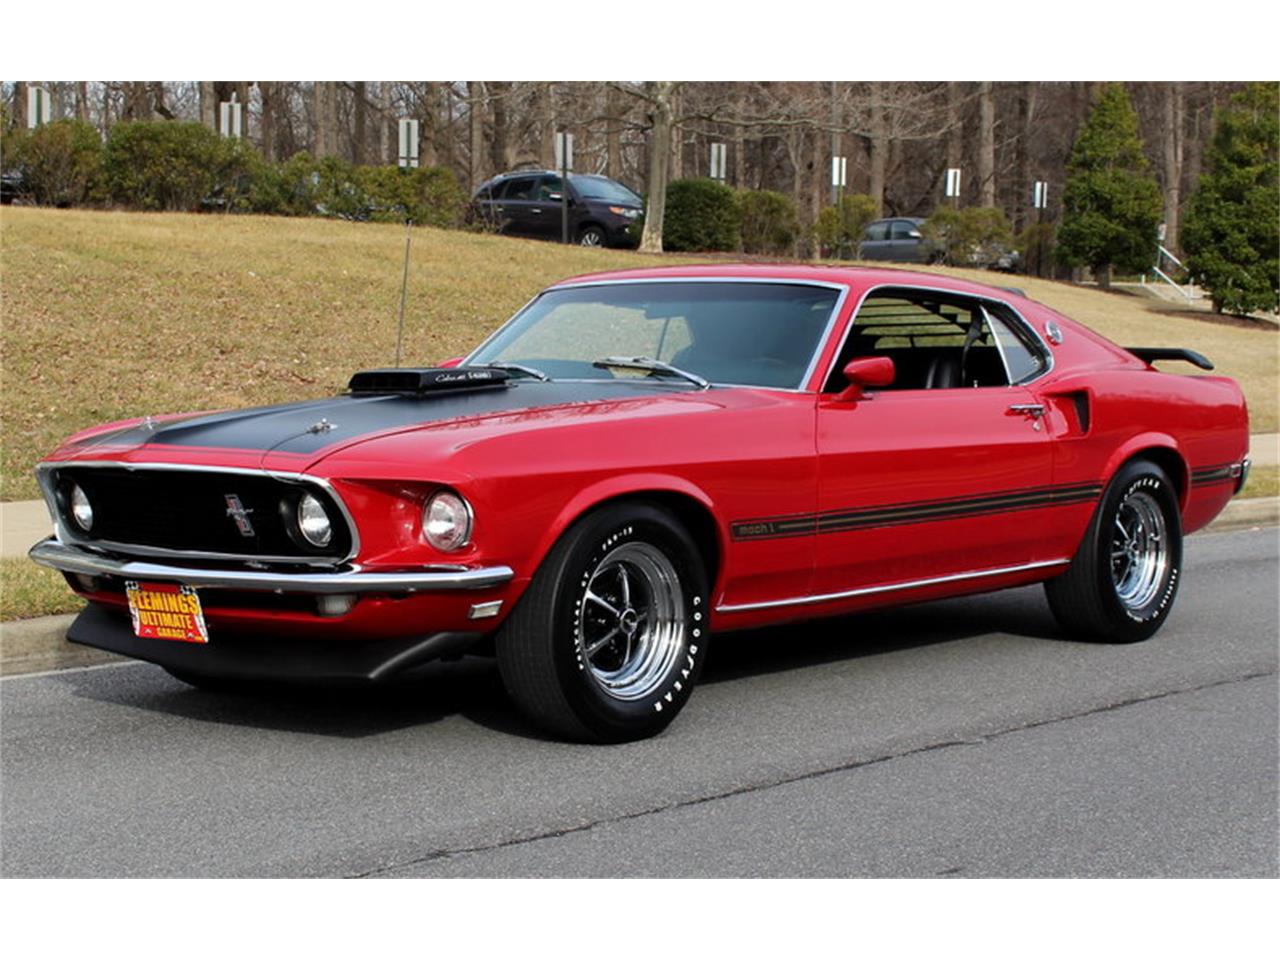 1969 Ford Mustang Mach 1 428 Cobra Jet for Sale | ClassicCars.com | CC ...